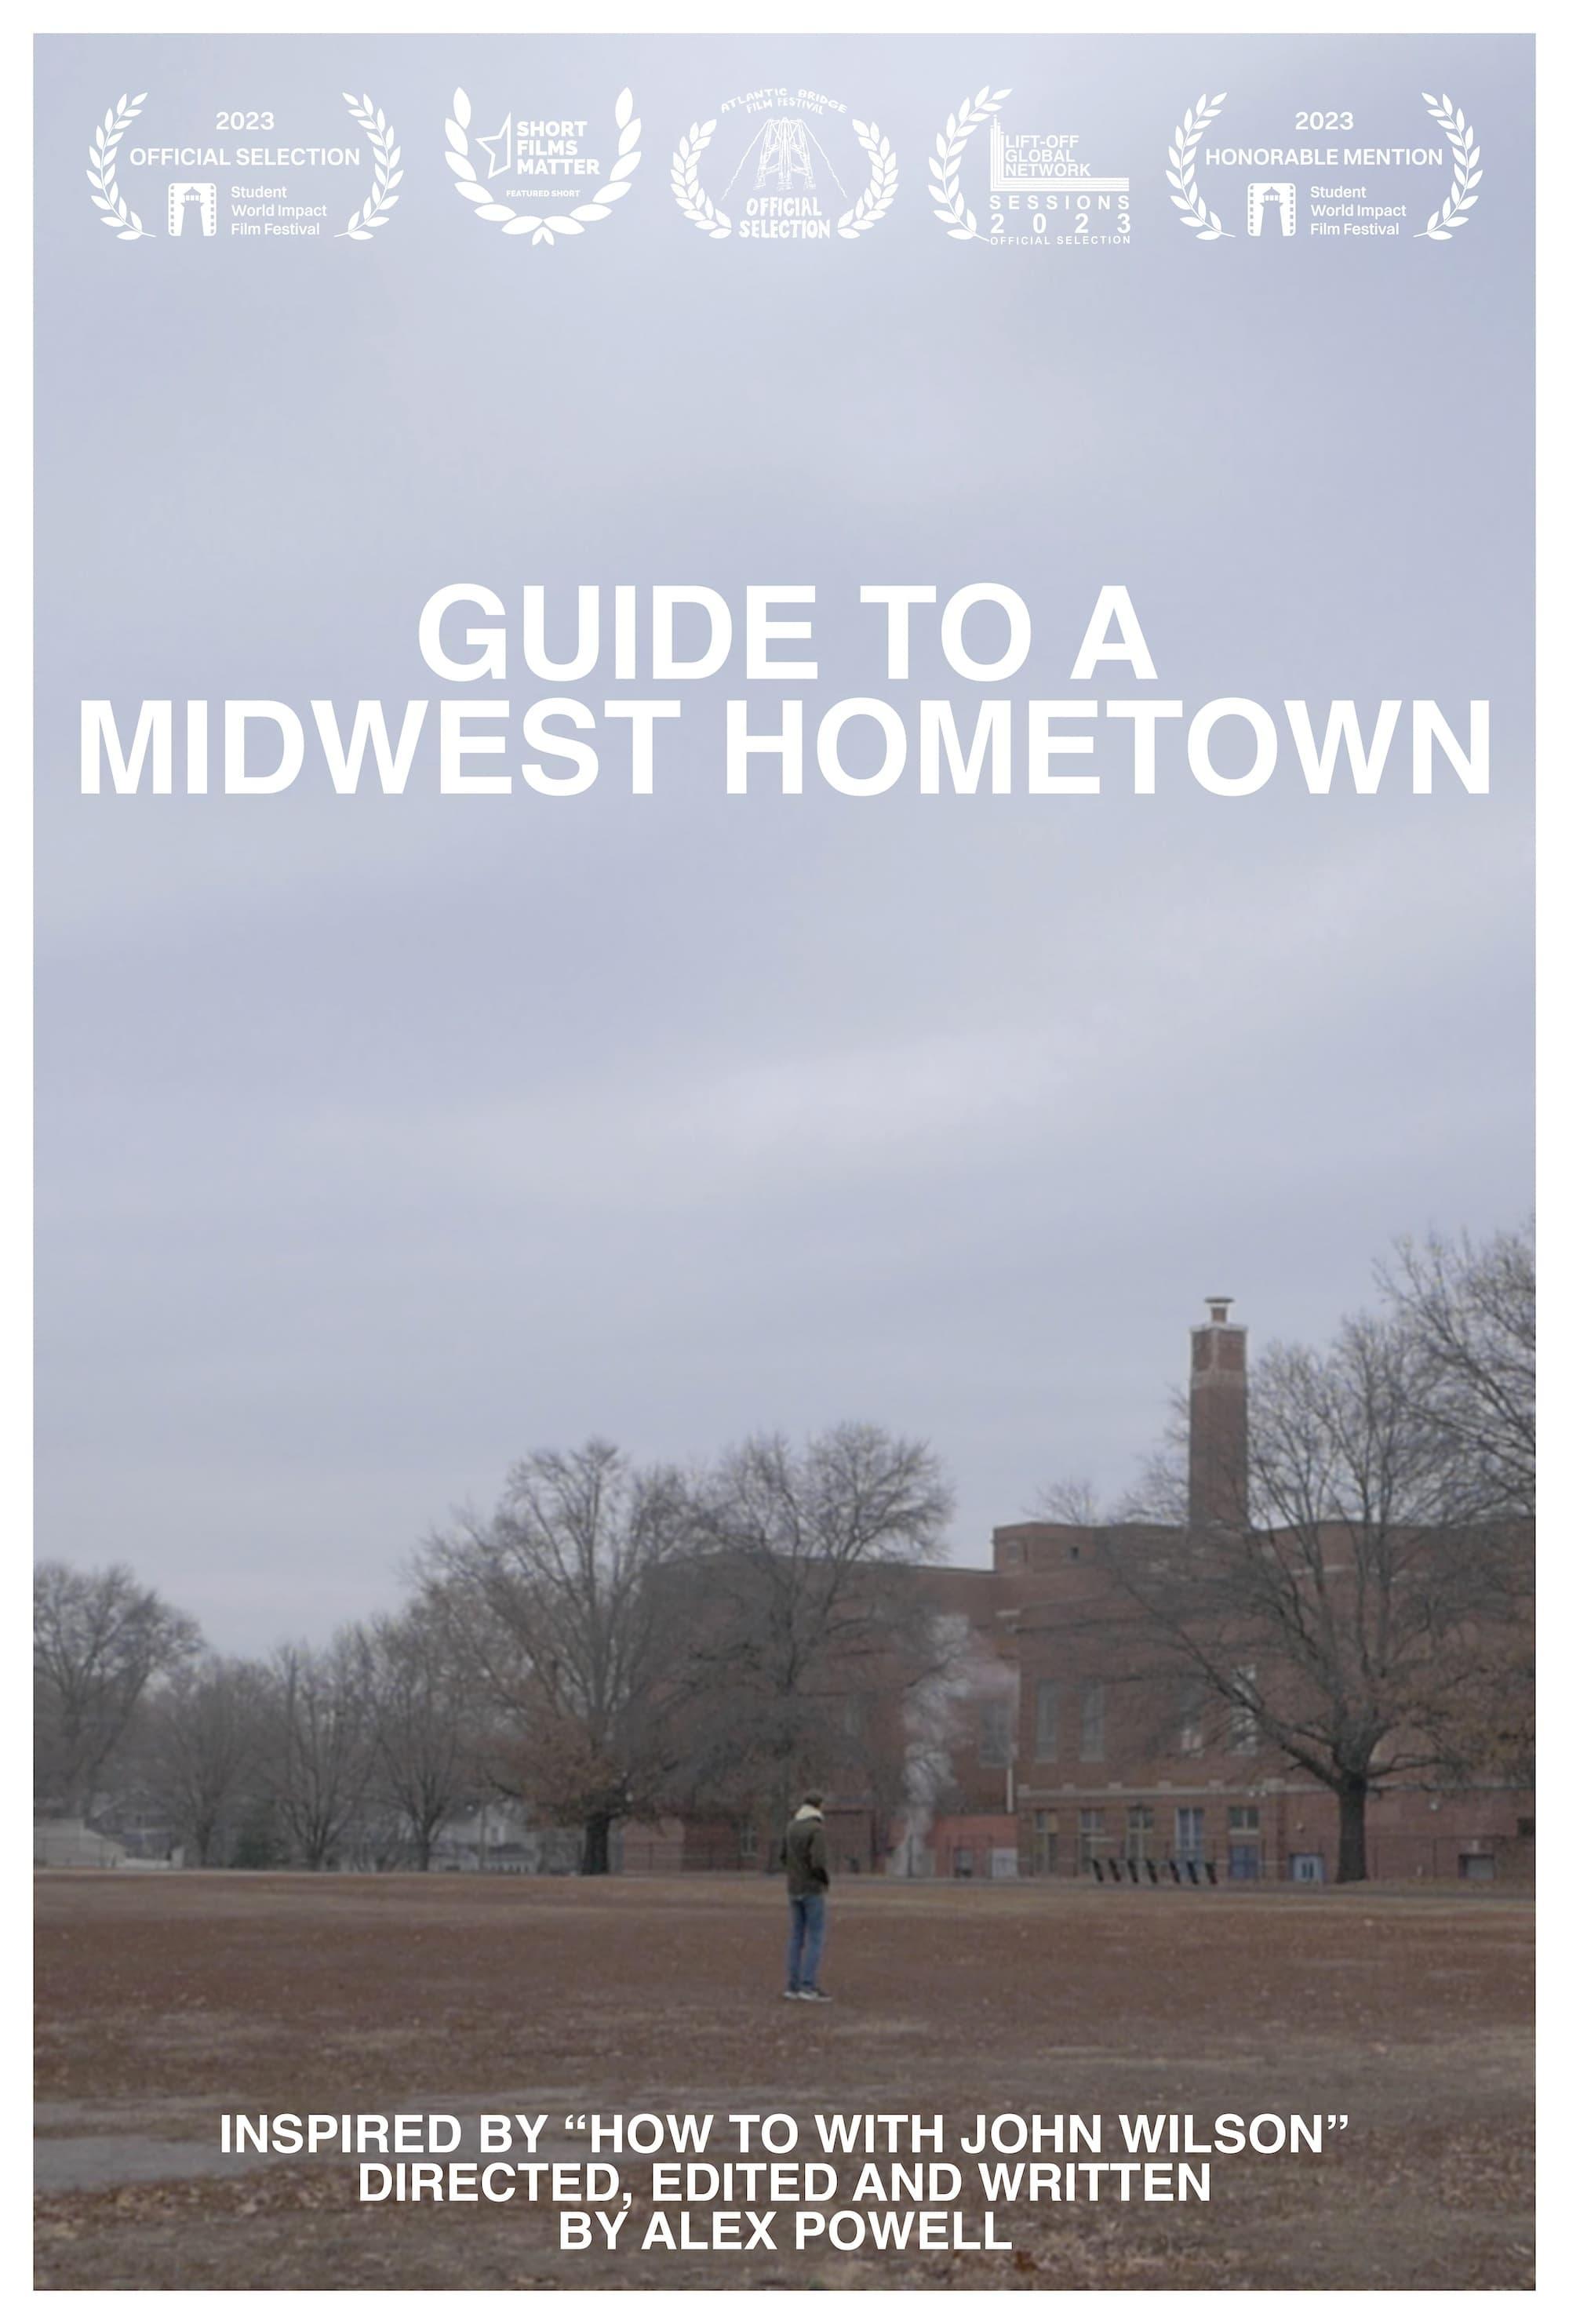 Guide to a Midwest Hometown poster